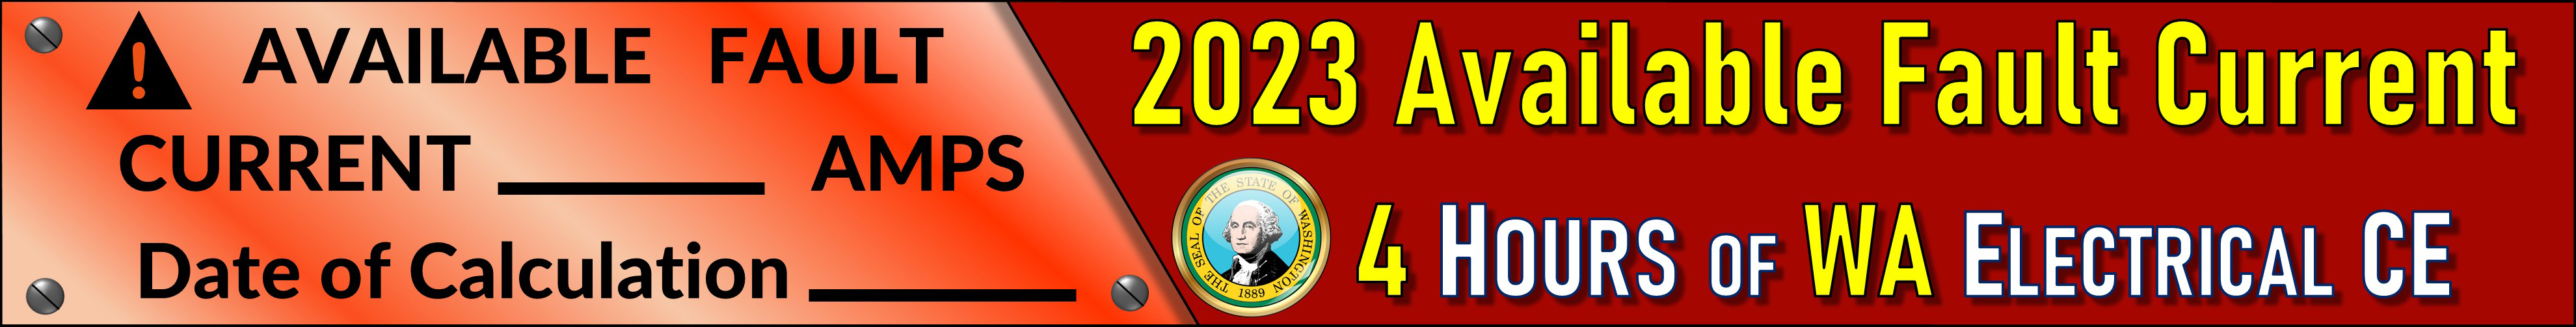 2023 Available Fault Current Banner